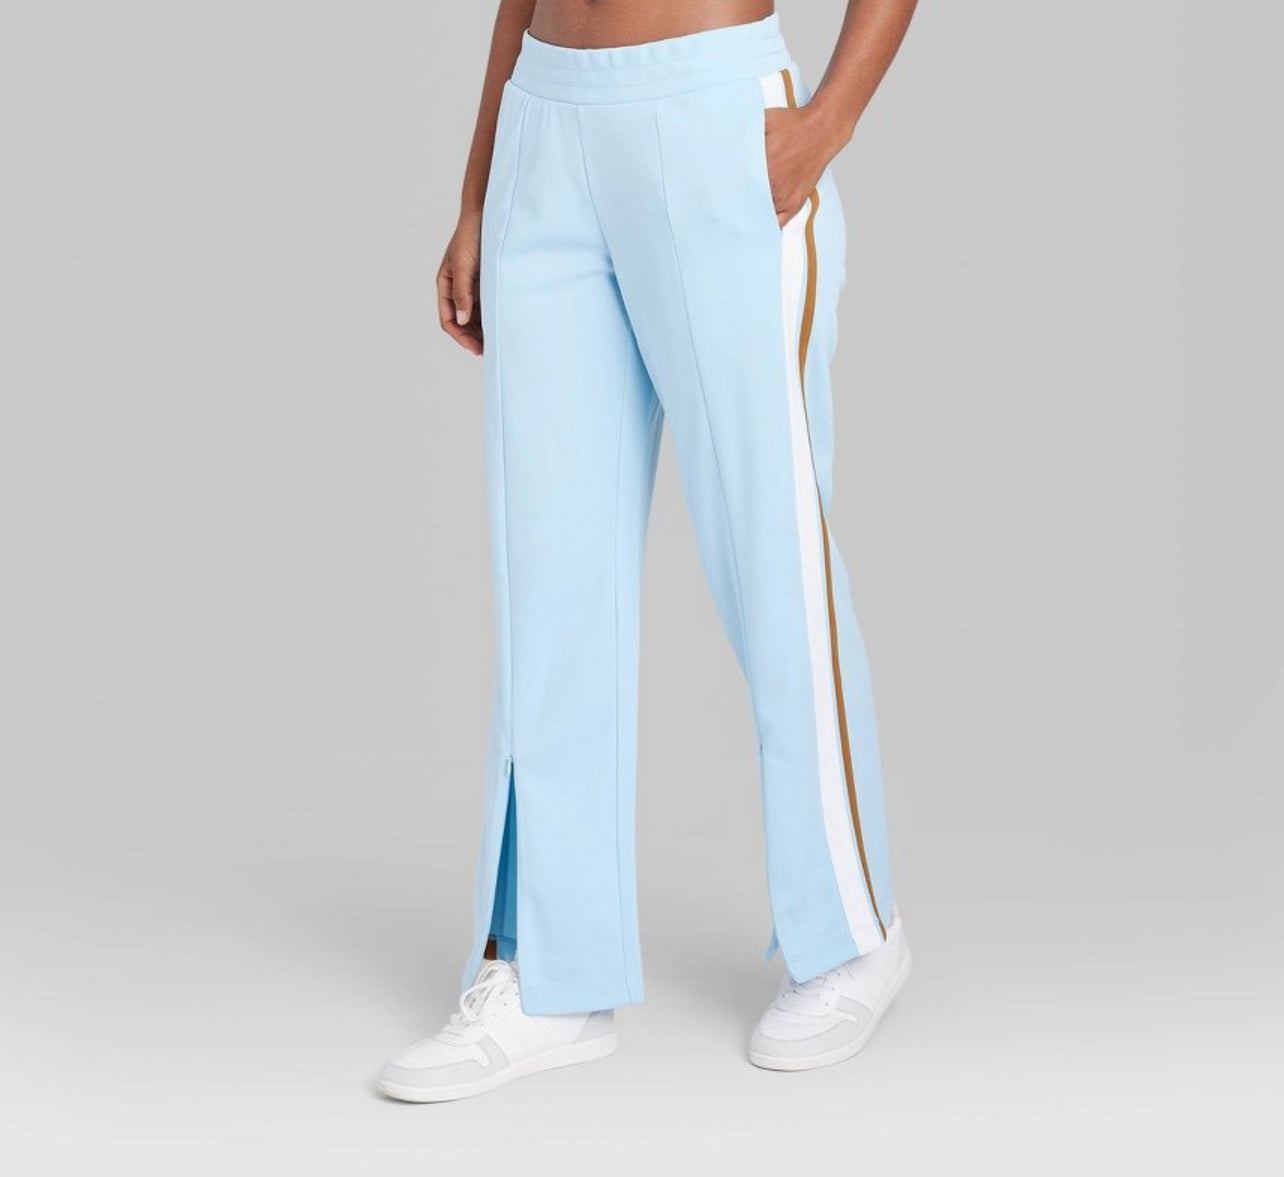 Women's High-Rise Track Pants - Wild Fable Blue SM